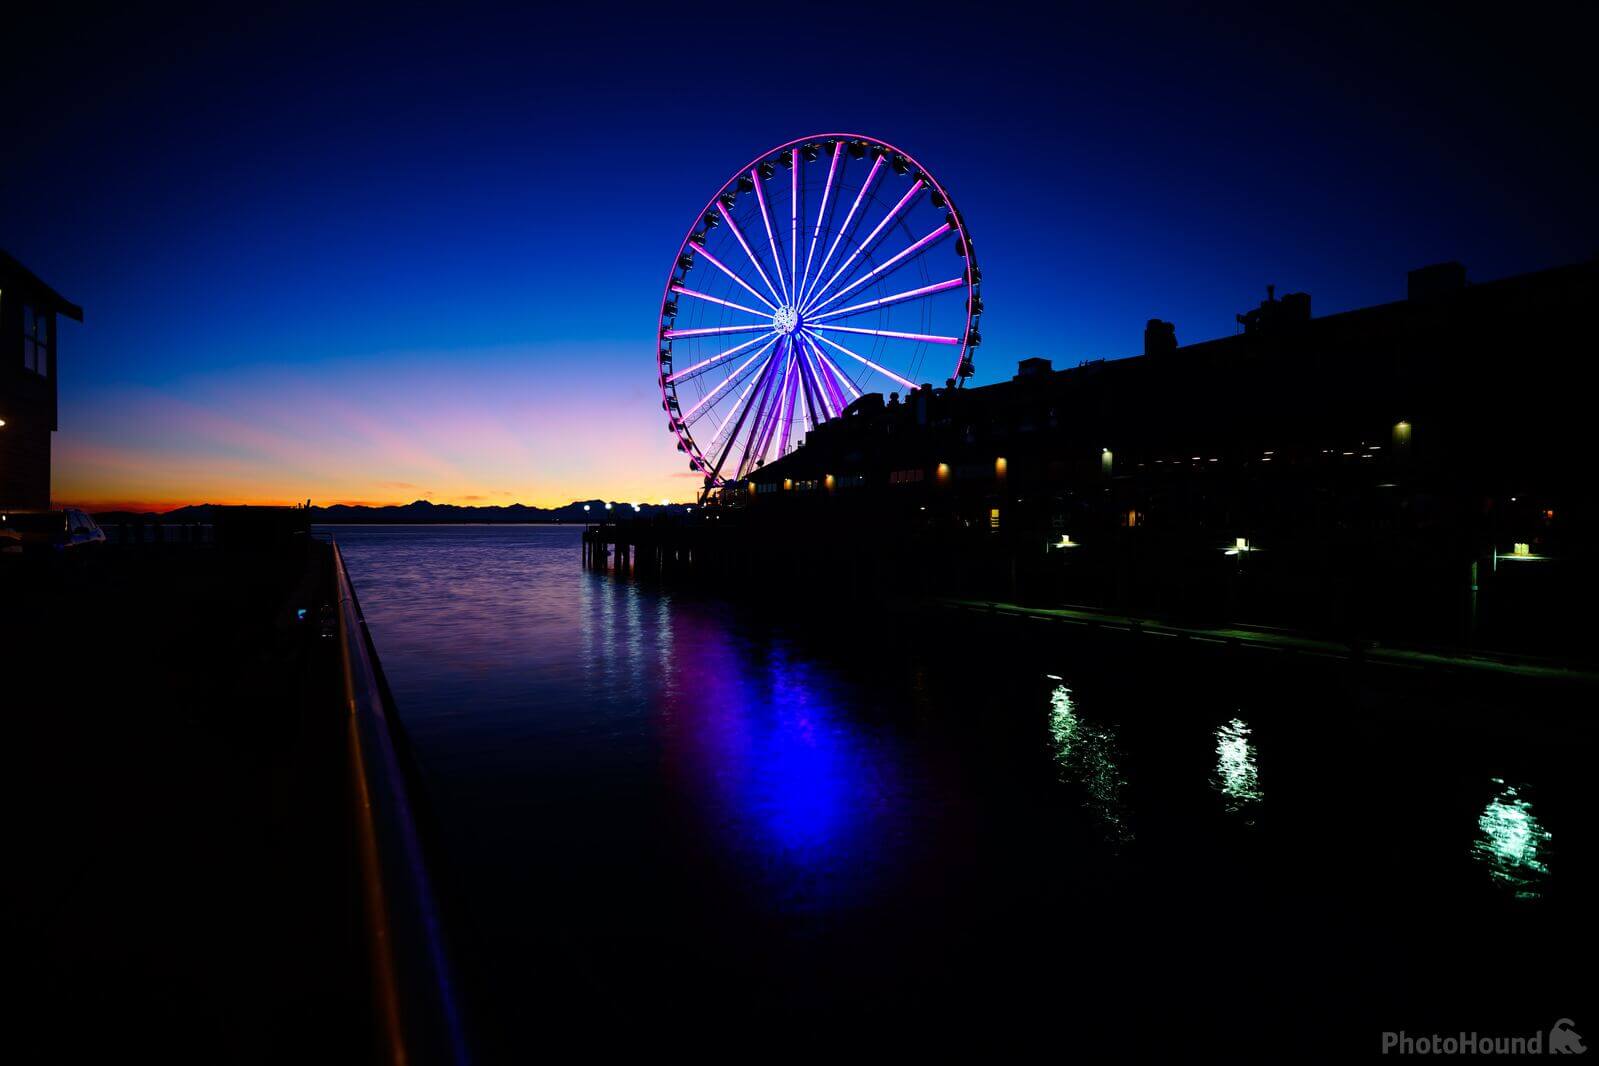 Image of Miner’s Landing Pier 57 & The Great Wheel by Team PhotoHound